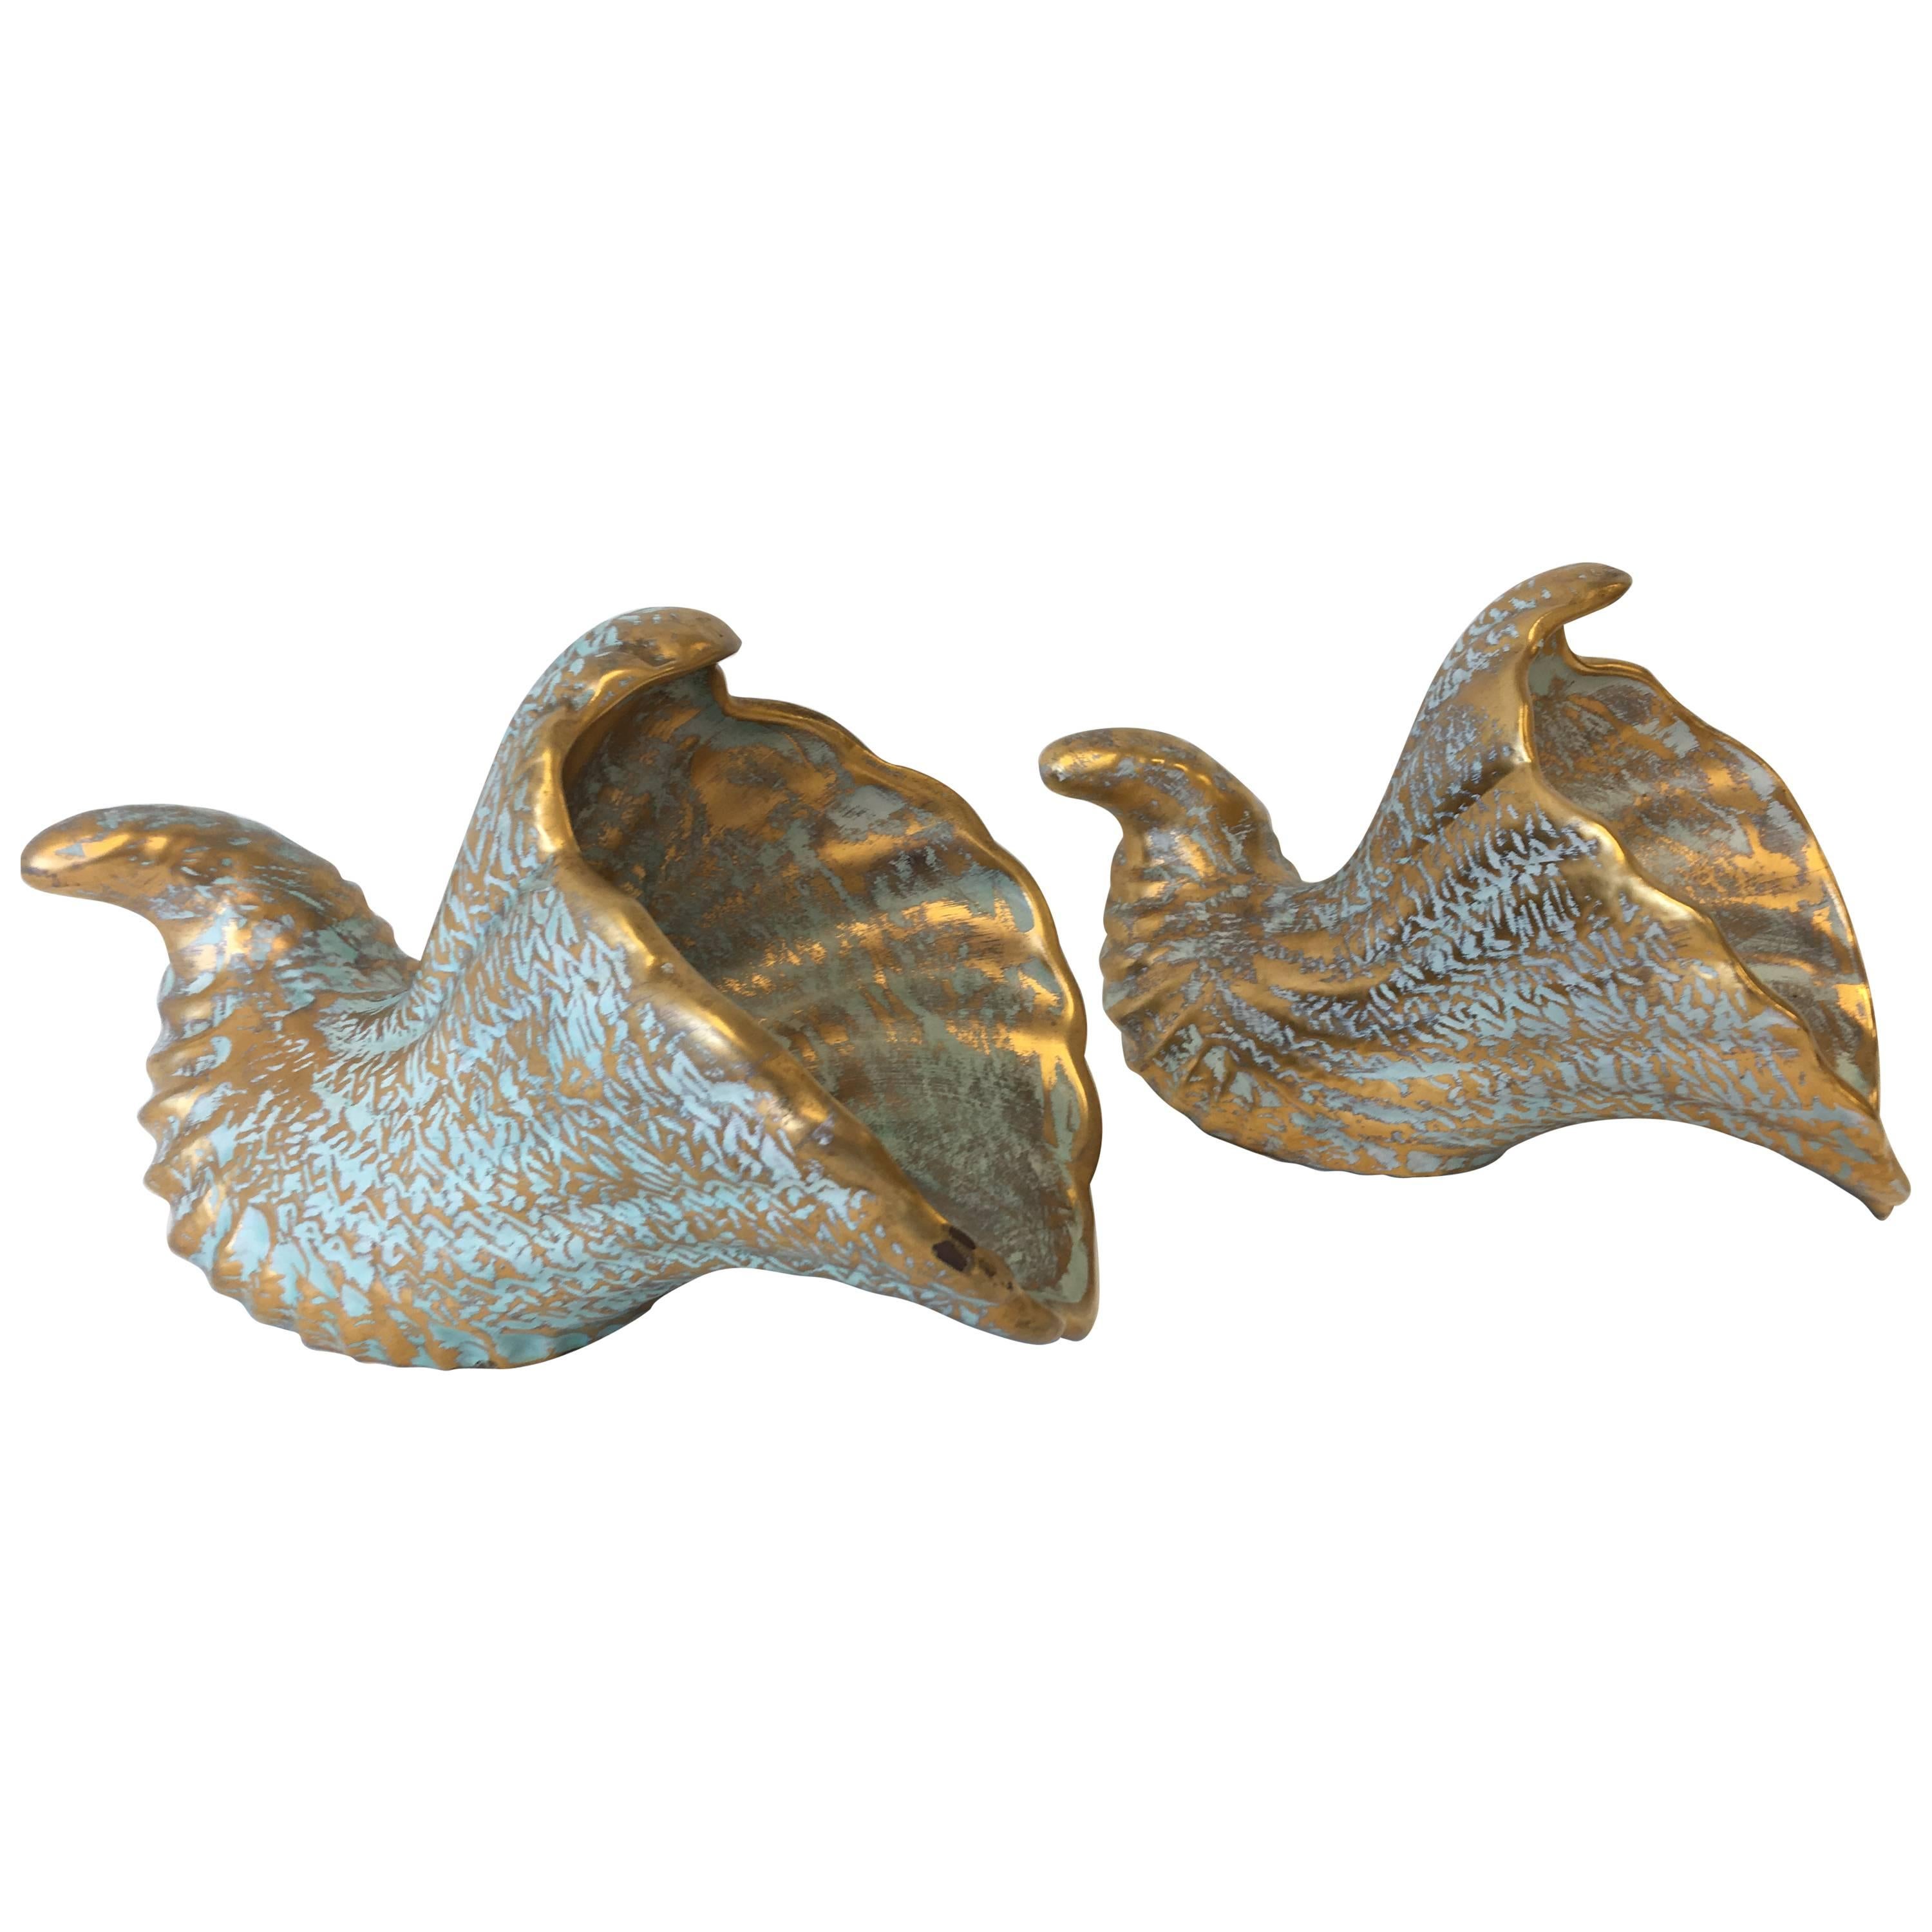 1970s Stangl Gold and Turquoise Cornucopia Serving Pieces, Pair